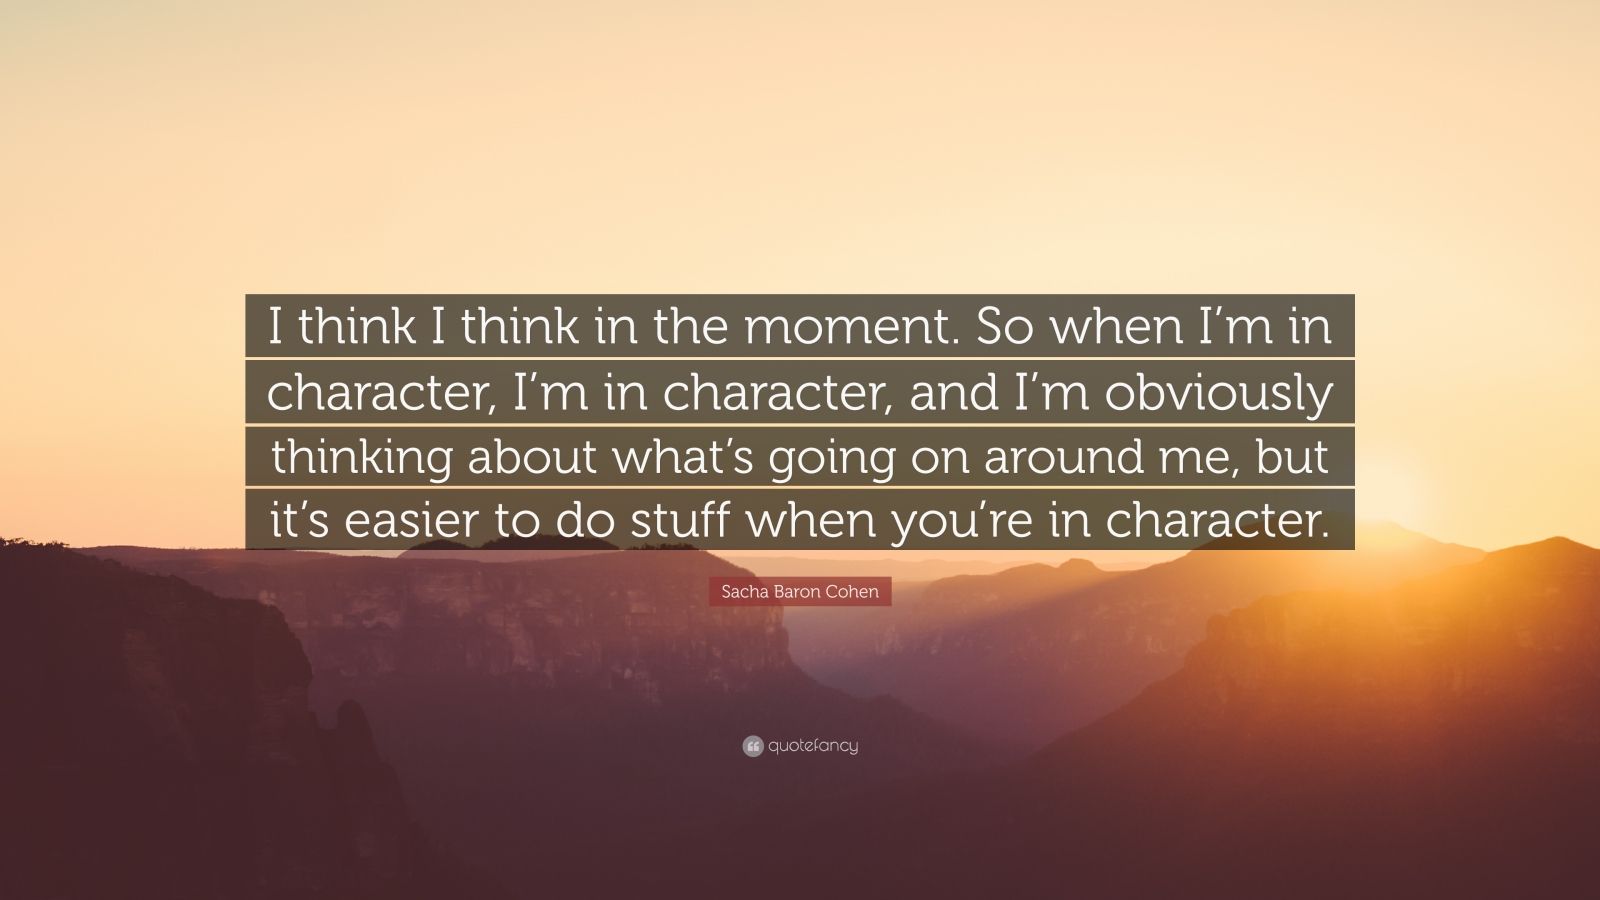 Sacha Baron Cohen Quote: "I think I think in the moment. So when I'm in character, I'm in ...